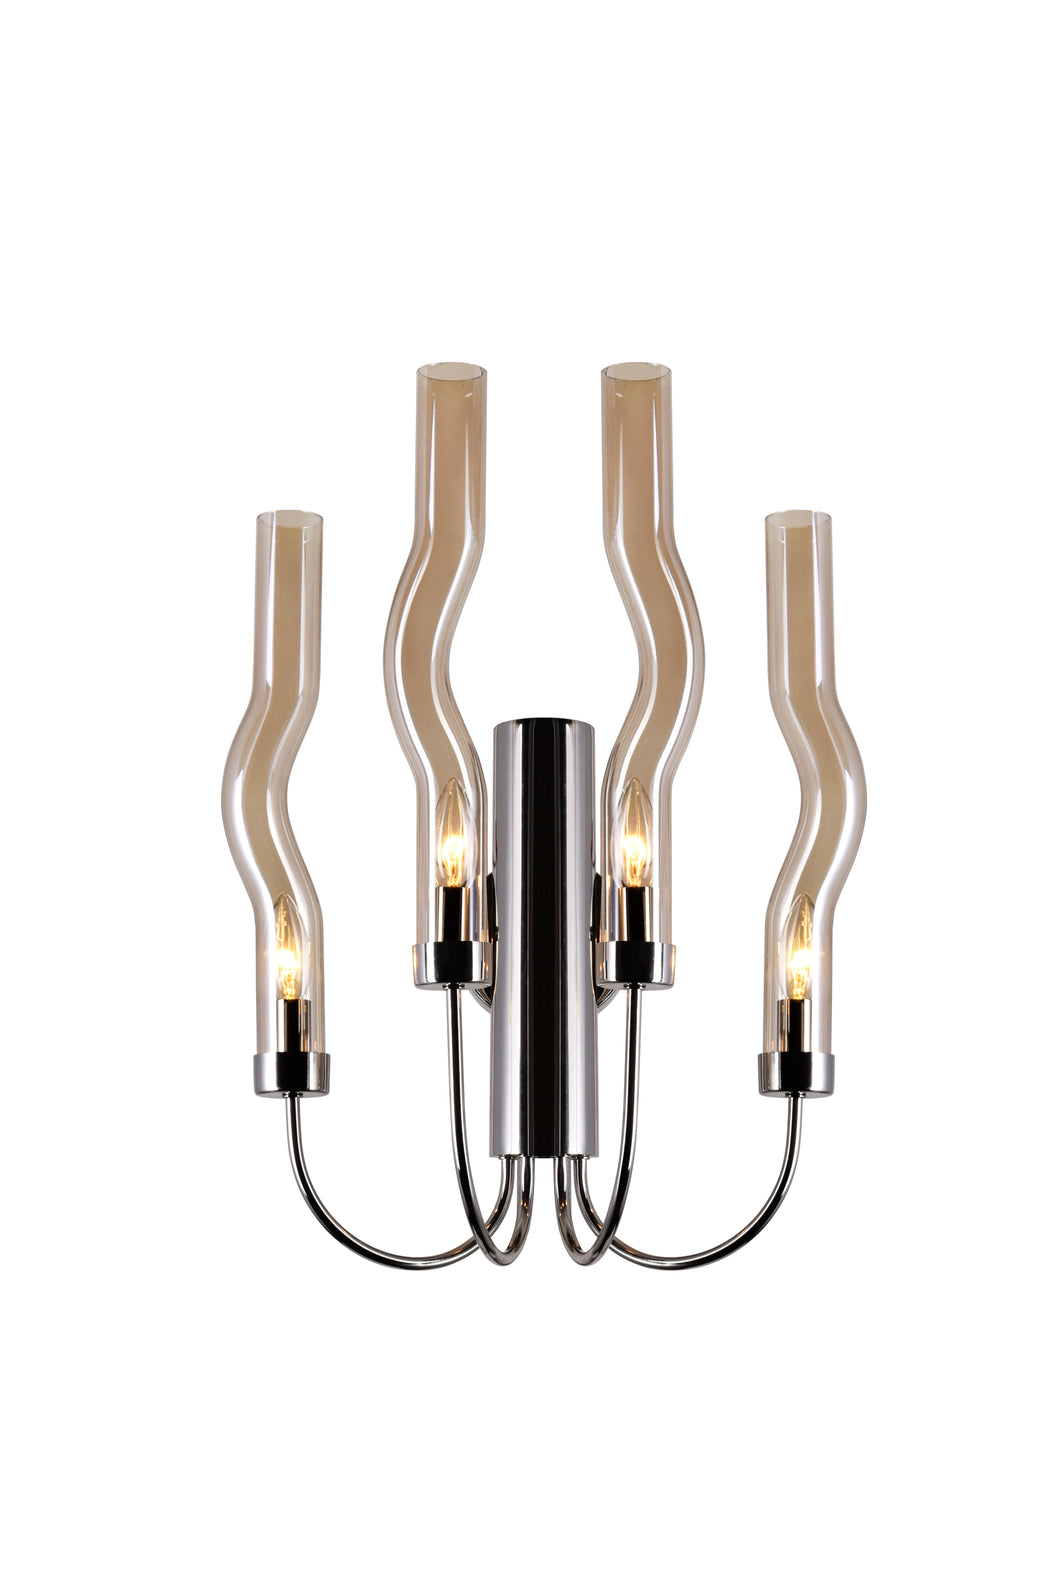 4 Light Sconce with Polished Nickel Finish